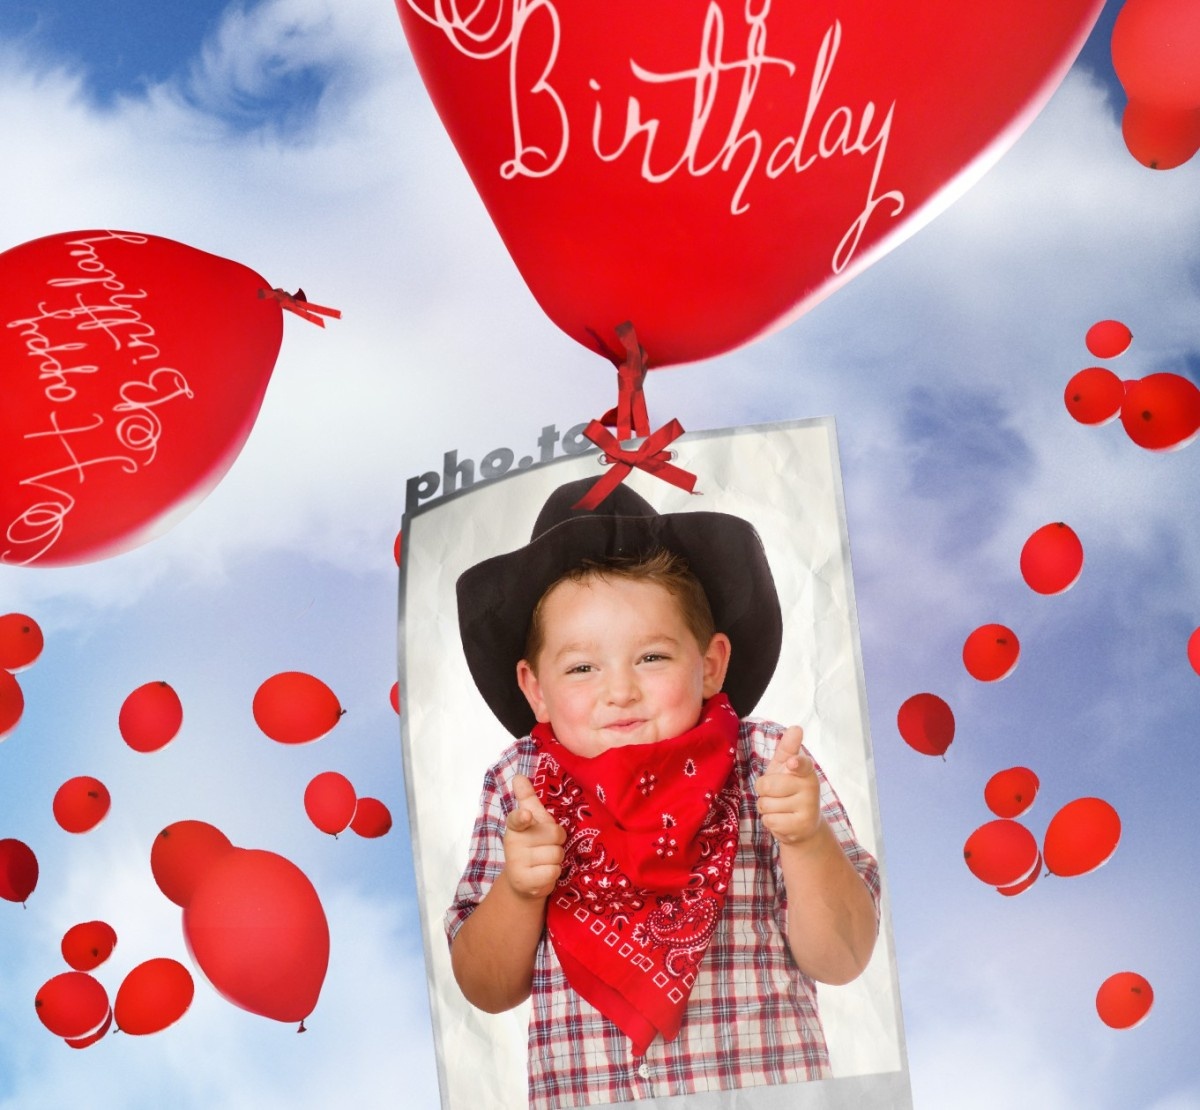 Birthday Card With Flying Balloons! Printable Photo Template - Make Your Own Printable Birthday Cards Online Free